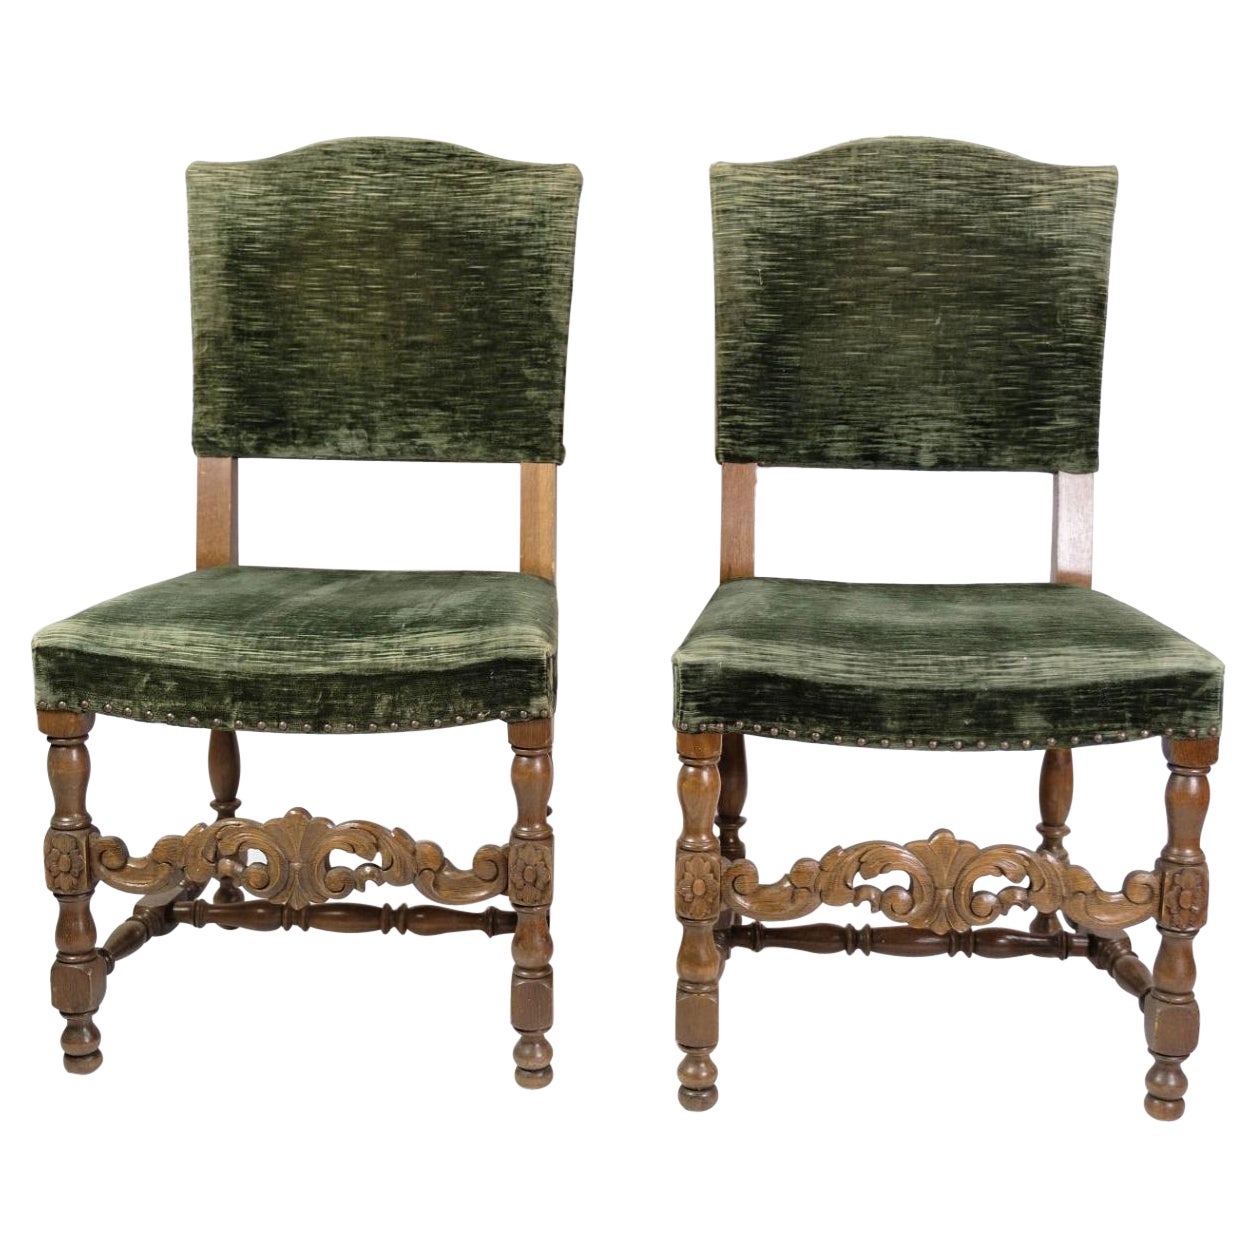 Renaissance style Chairs Made In Oak With Green Fabric From 1930s